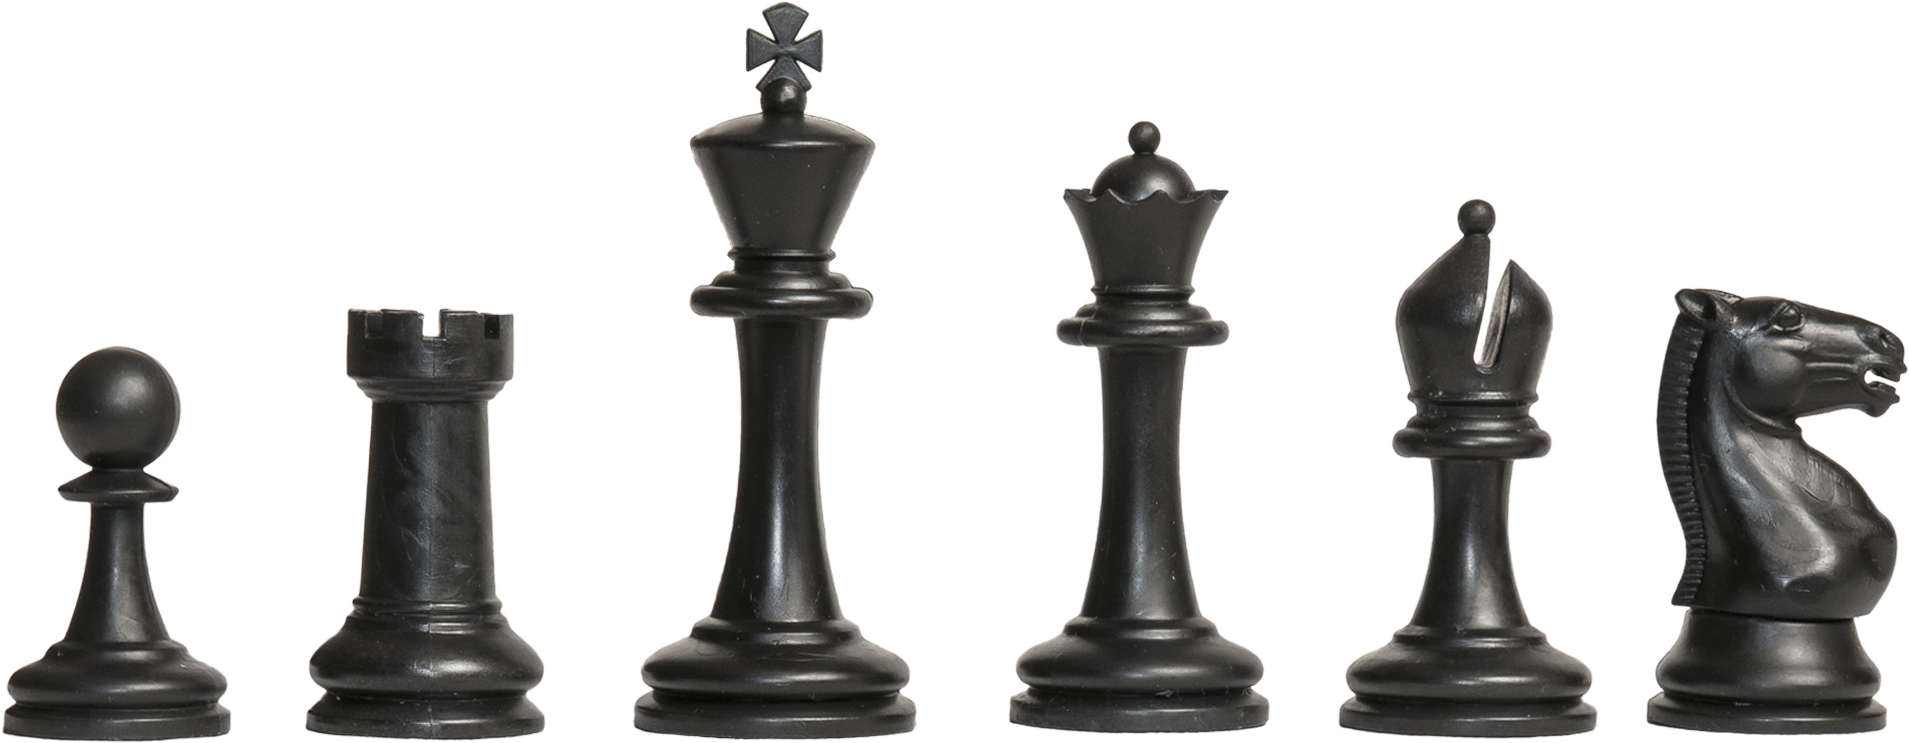 Hockey Puzzles Canasta Chess Billiards PNG